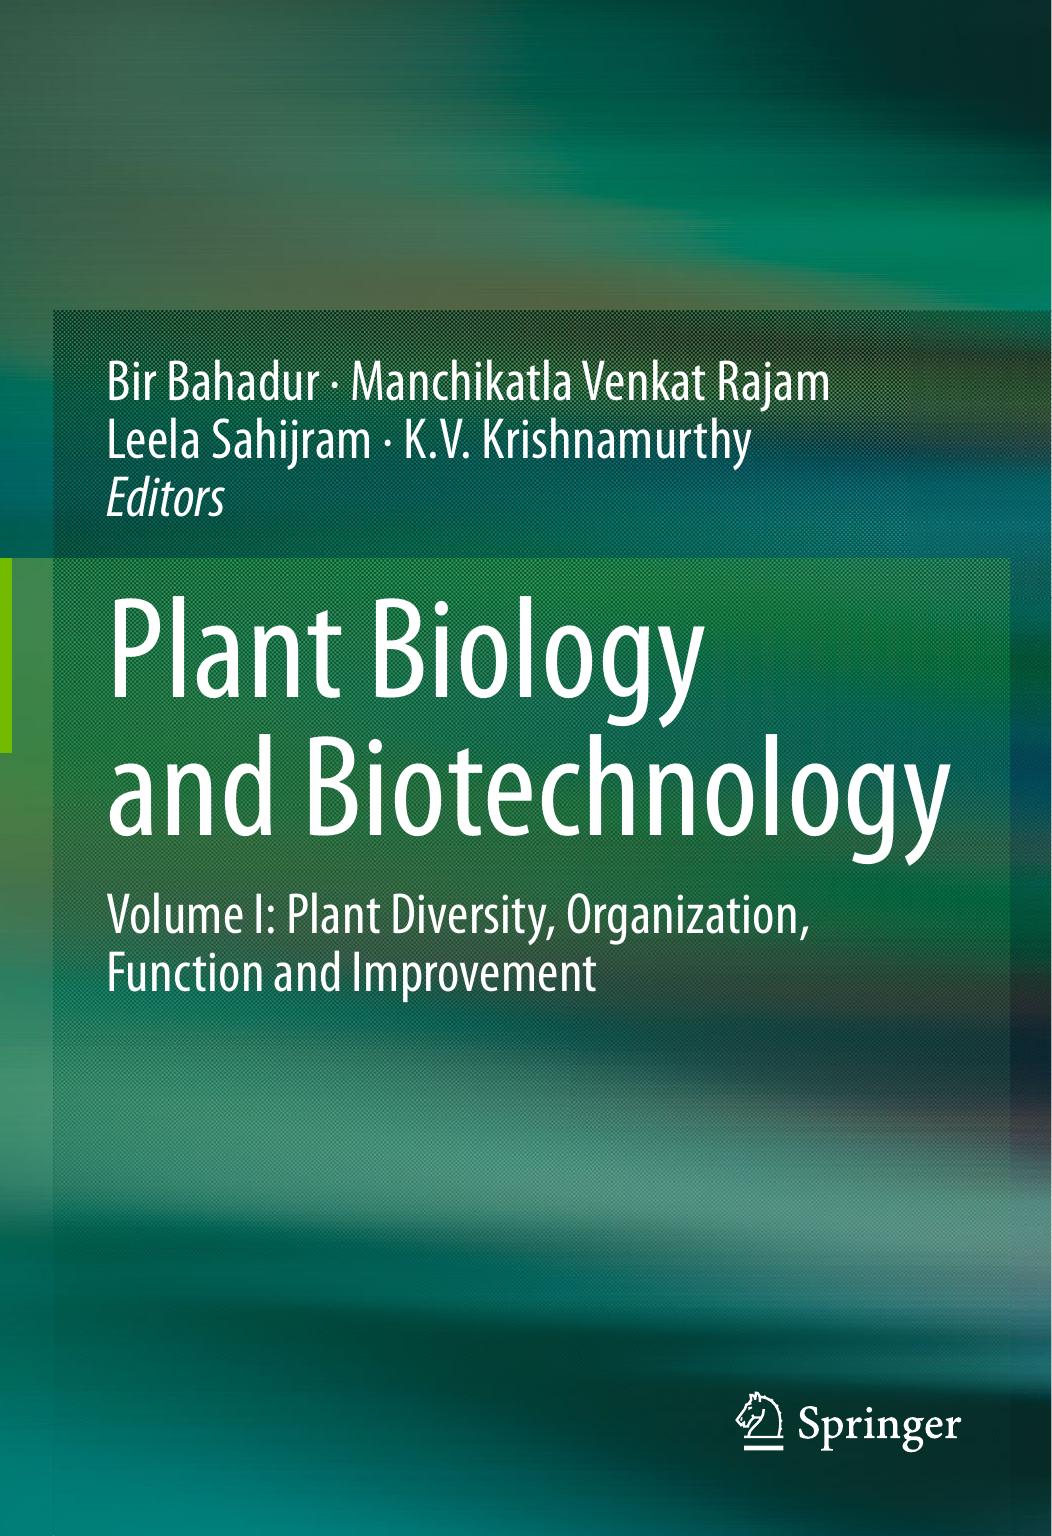 Plant Biology and Biotechnology  Volume I  Plant Diversity, Organization, Function and Improvement ( PDFDrive ), 2015